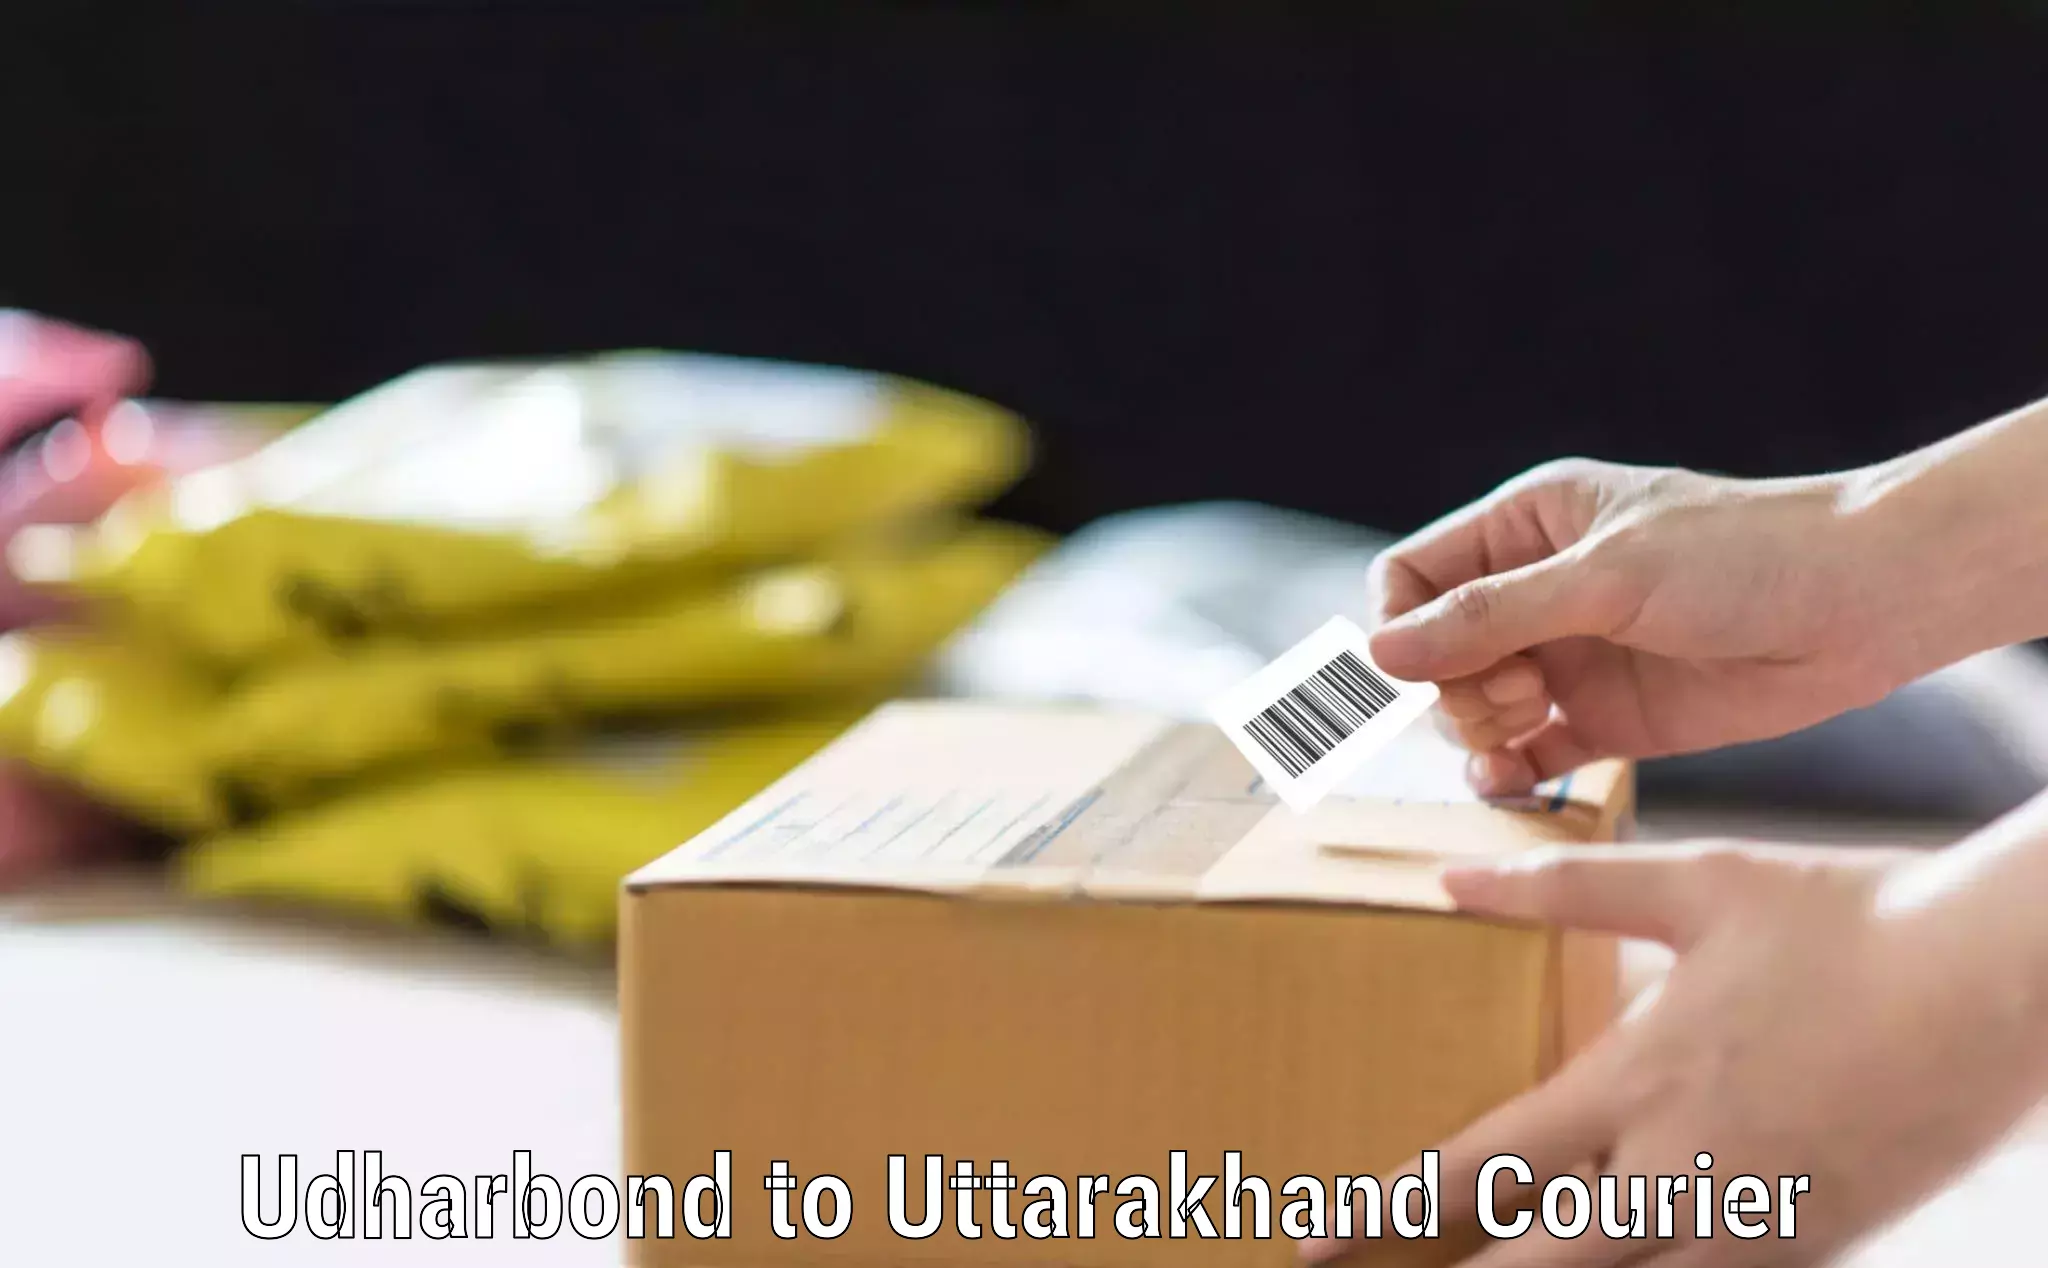 Luggage delivery operations Udharbond to Nainital